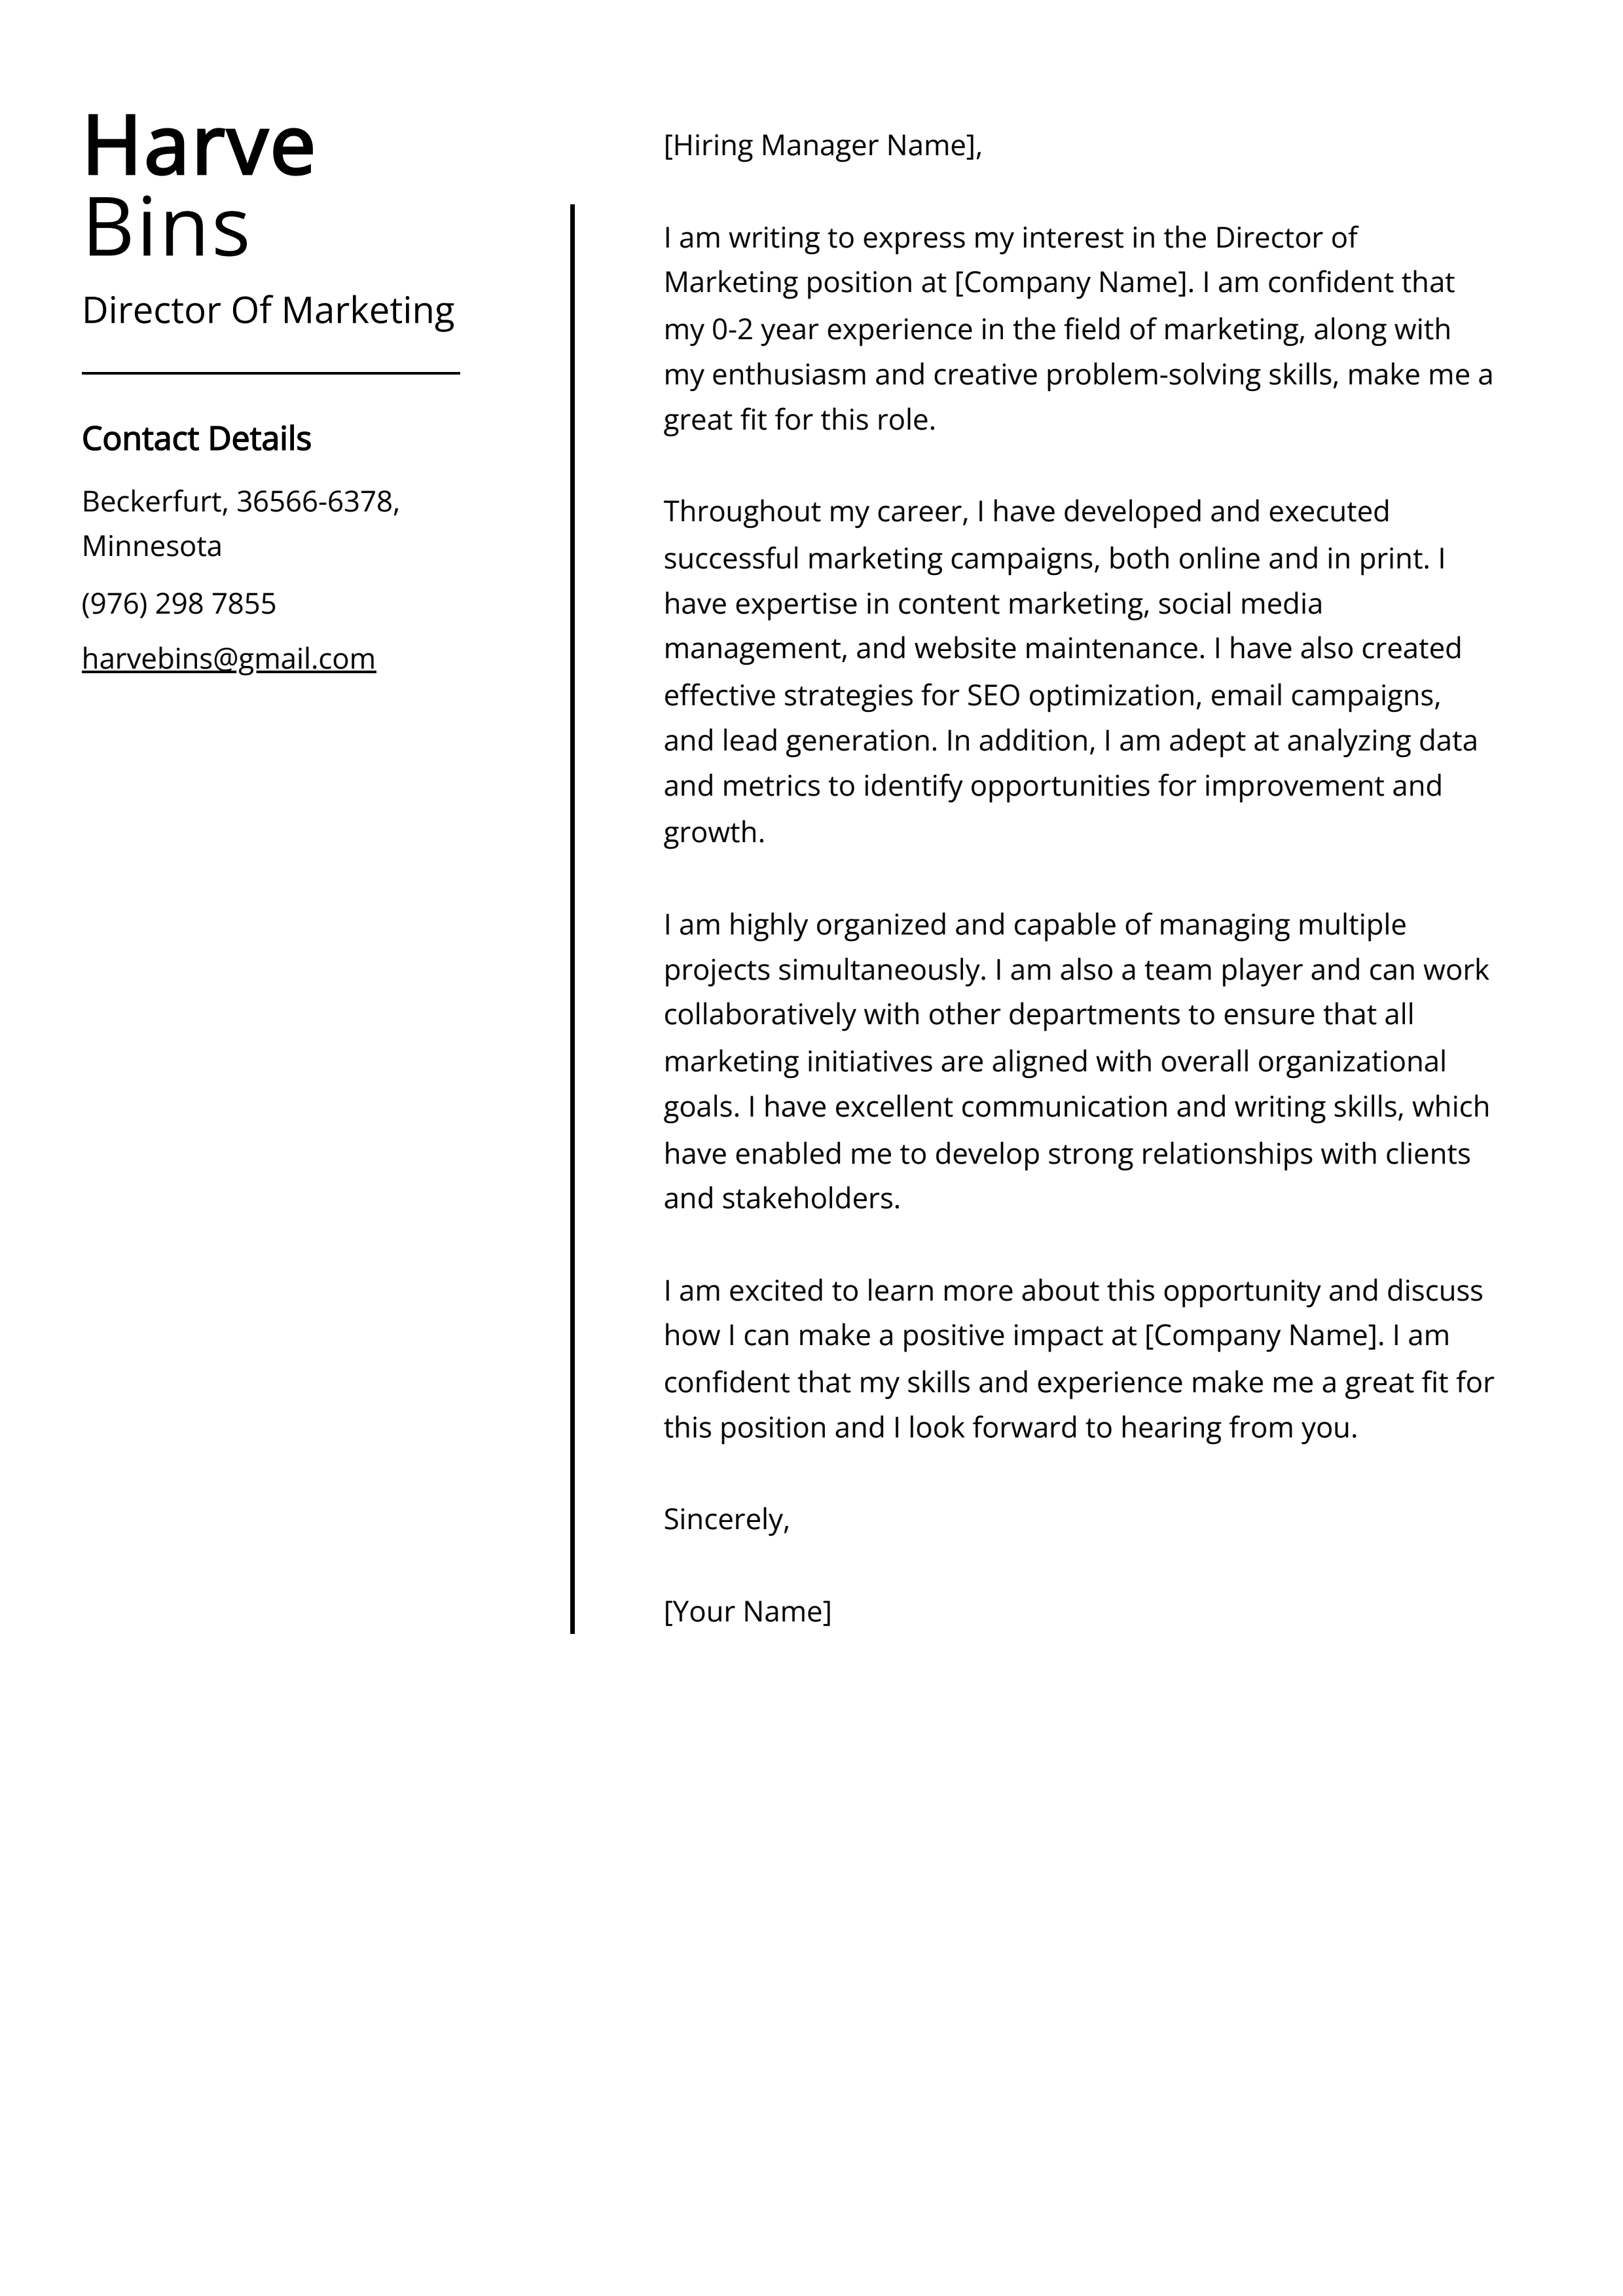 Director Of Marketing Cover Letter Example